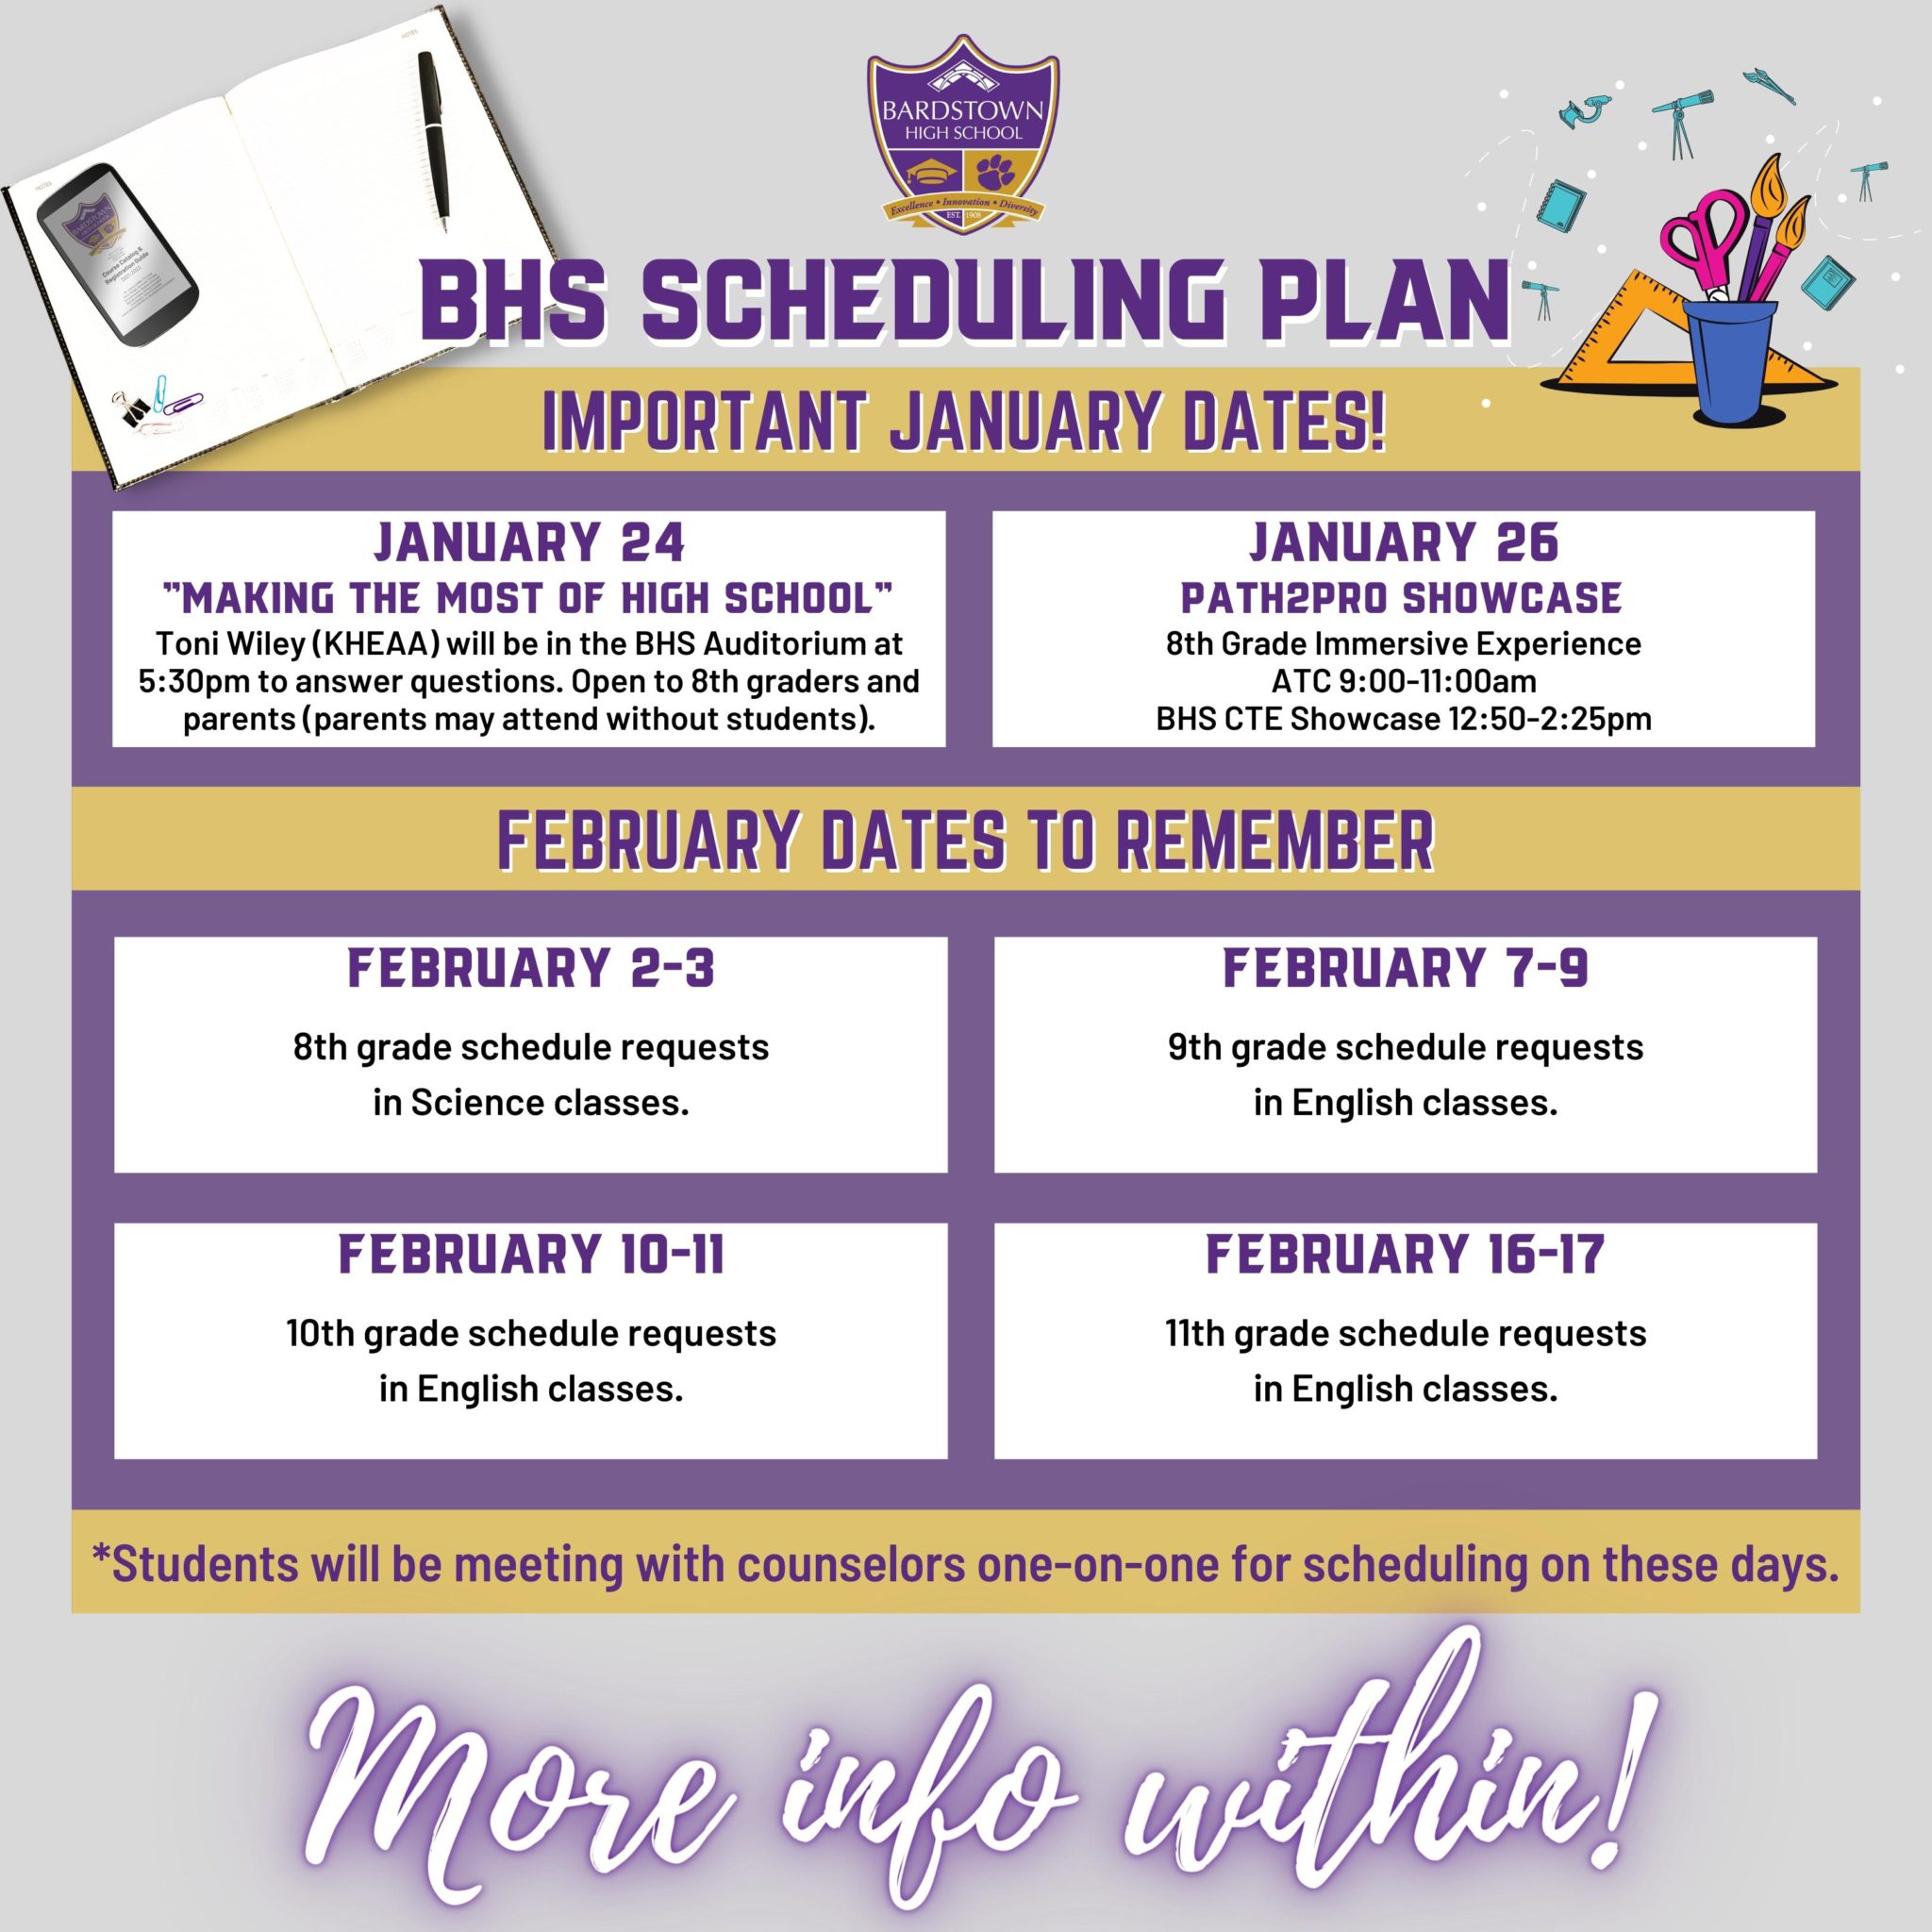 2022 BHS Scheduling Plan Now Available – Bardstown High School